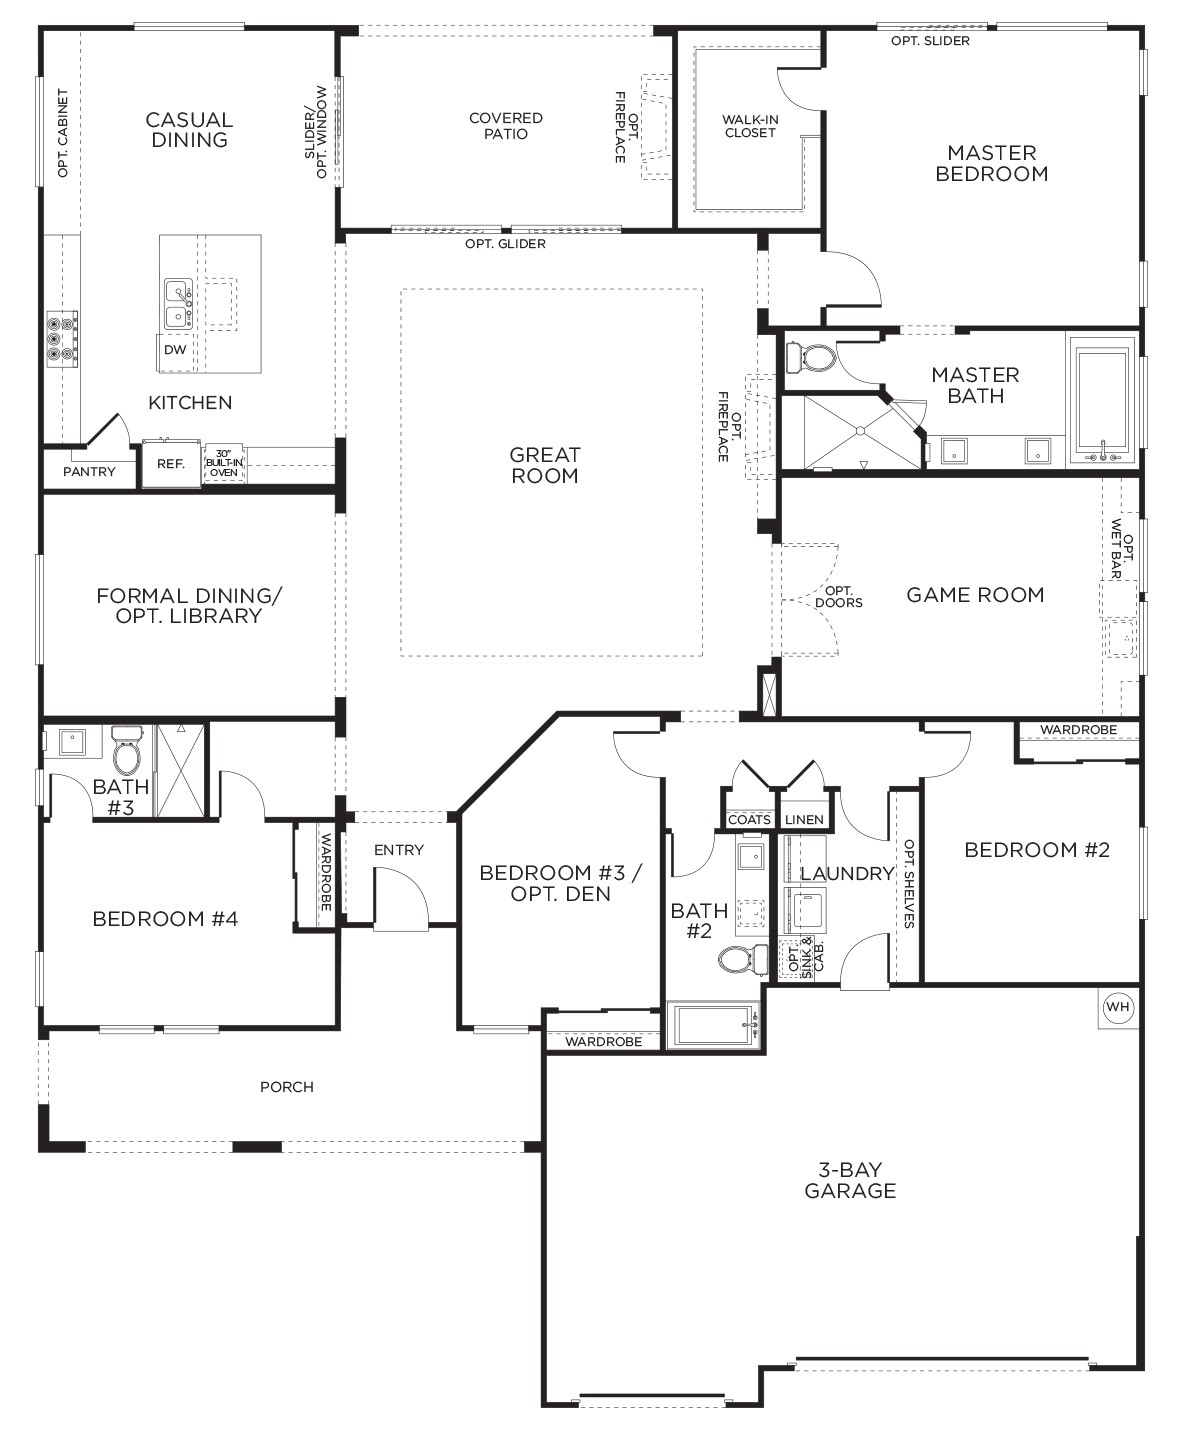 love this layout with extra rooms single story floor plans one story house plans pardee homes a lot of potential